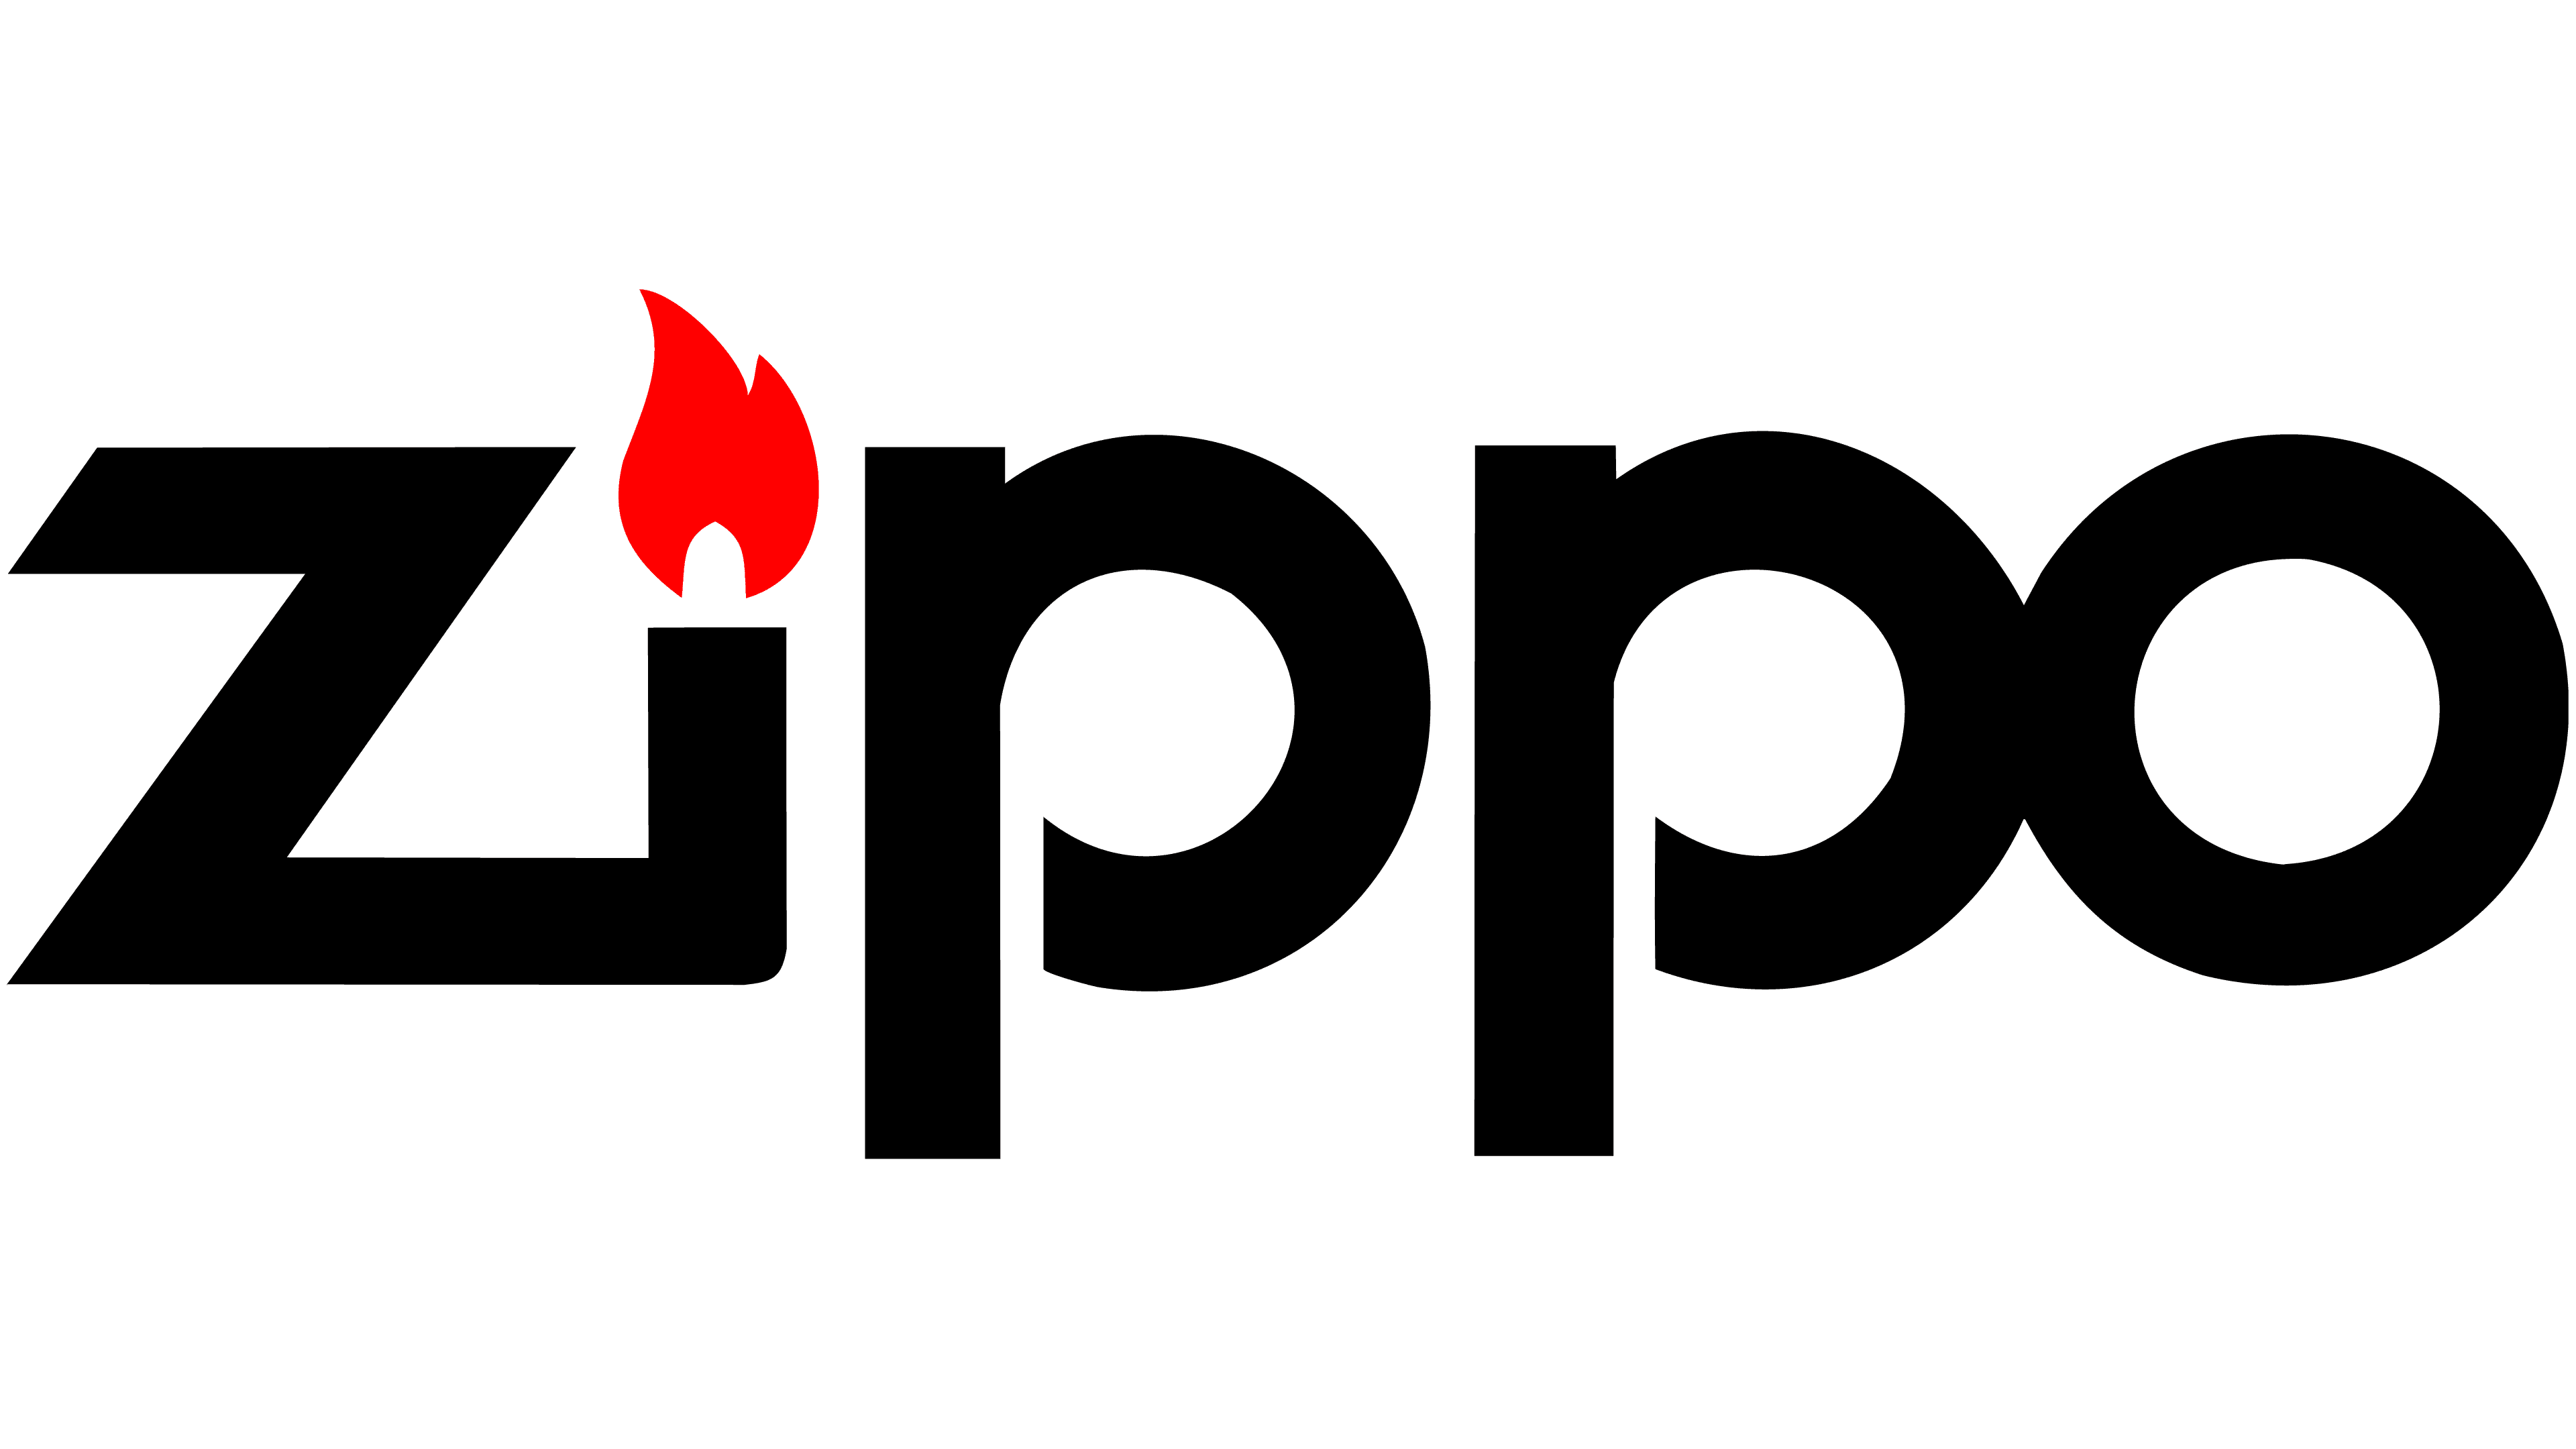 Zippo logo and symbol, meaning, history, PNG